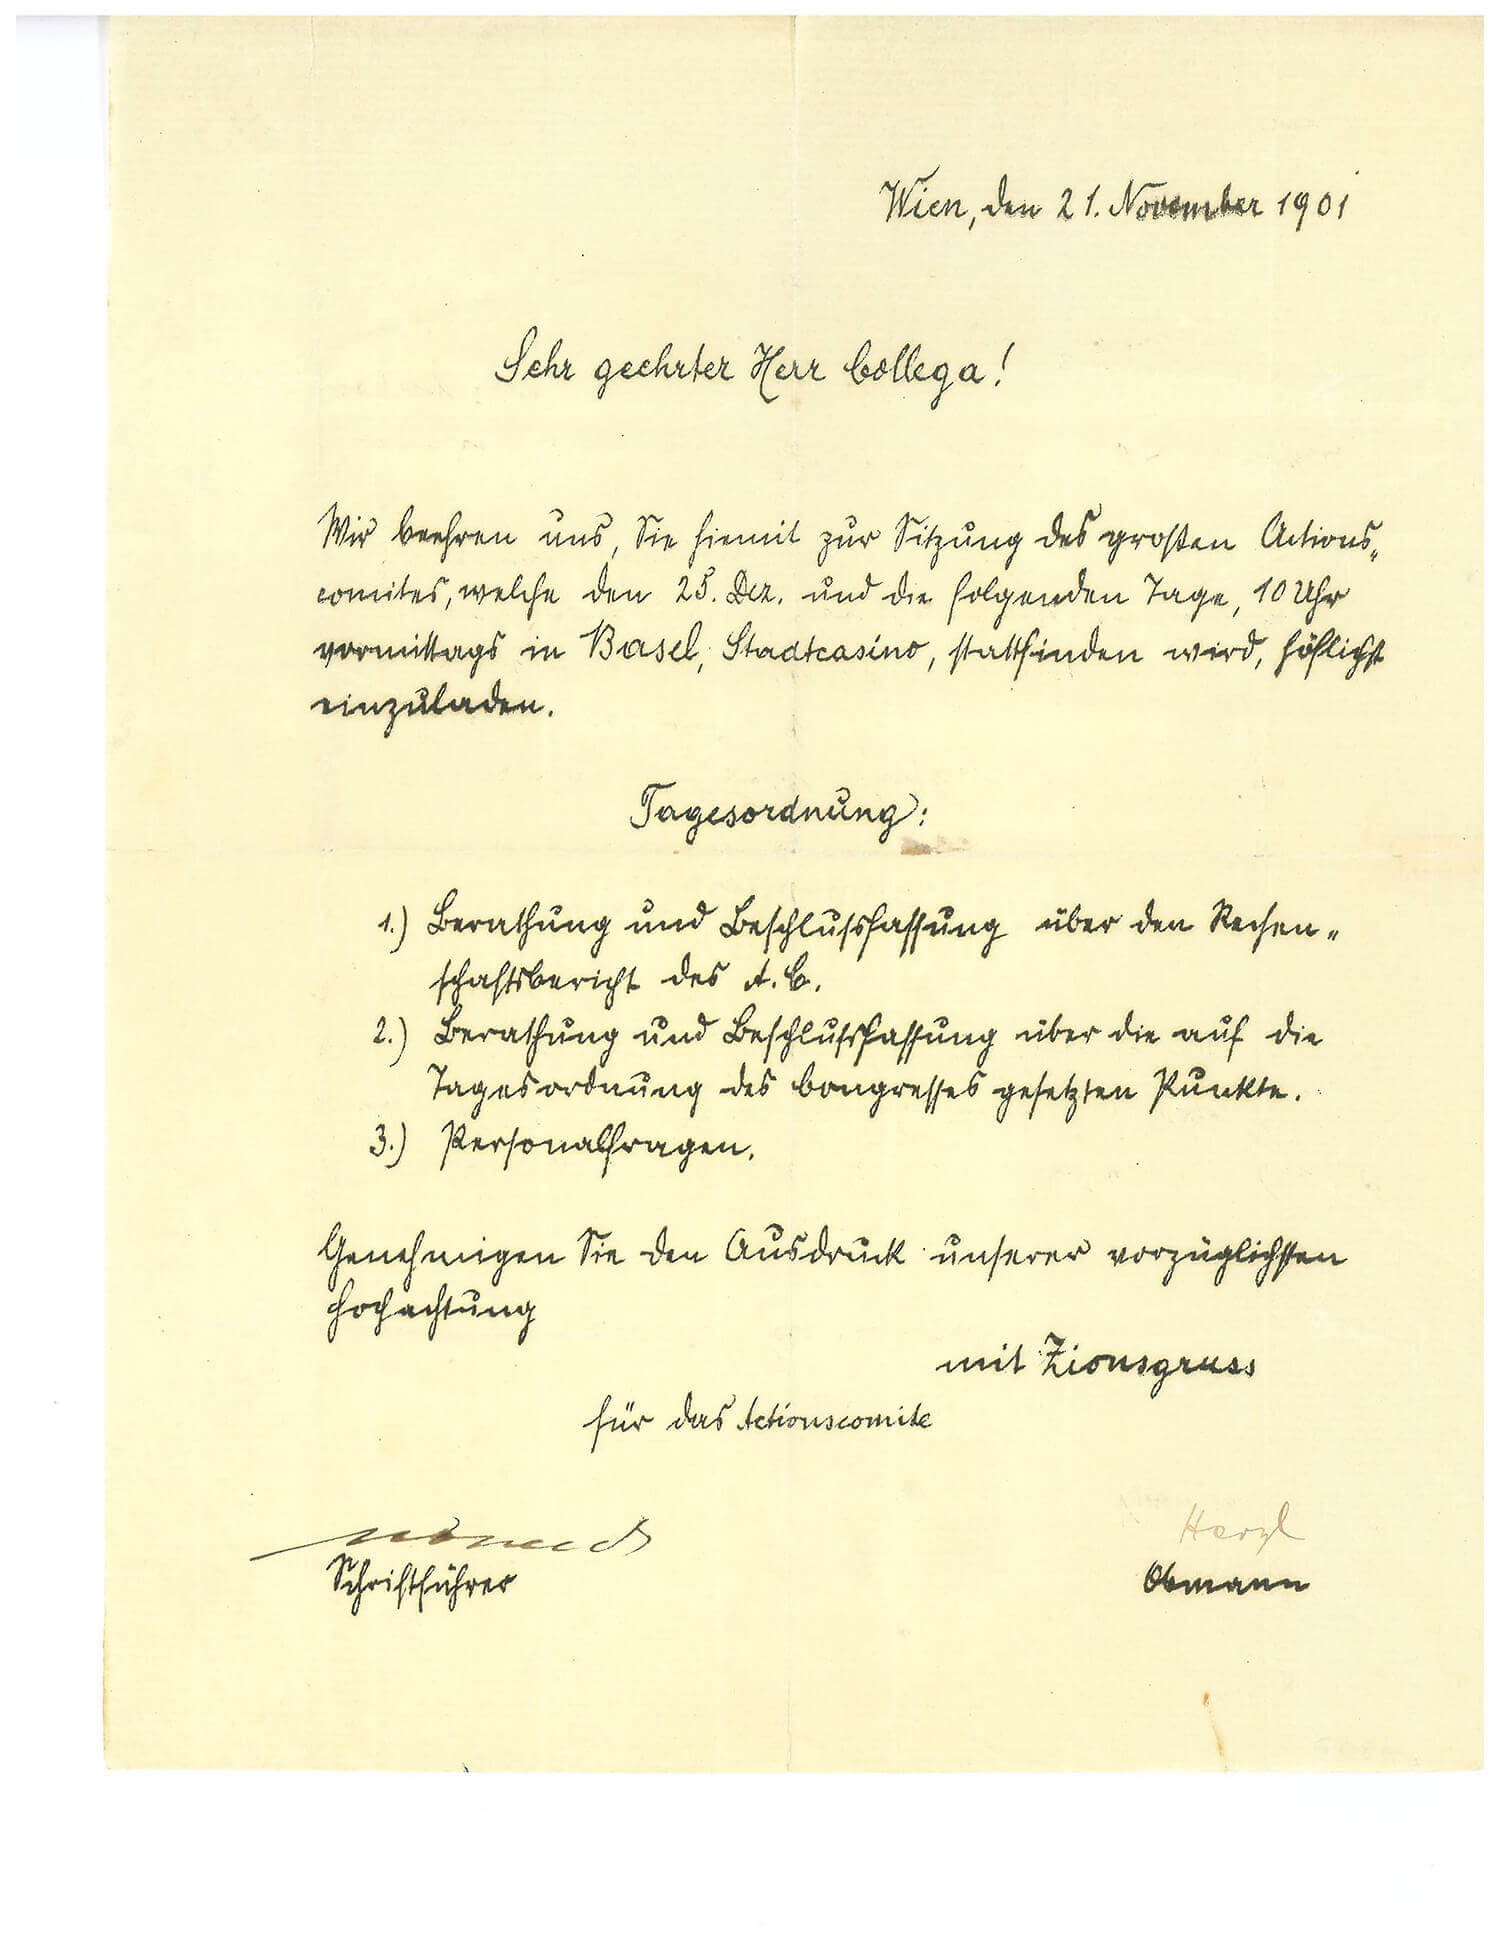 179. A HAND SIGNED INVITATION TO THE GREAT ACTION COMMITTEE BY THEODOR HERZL